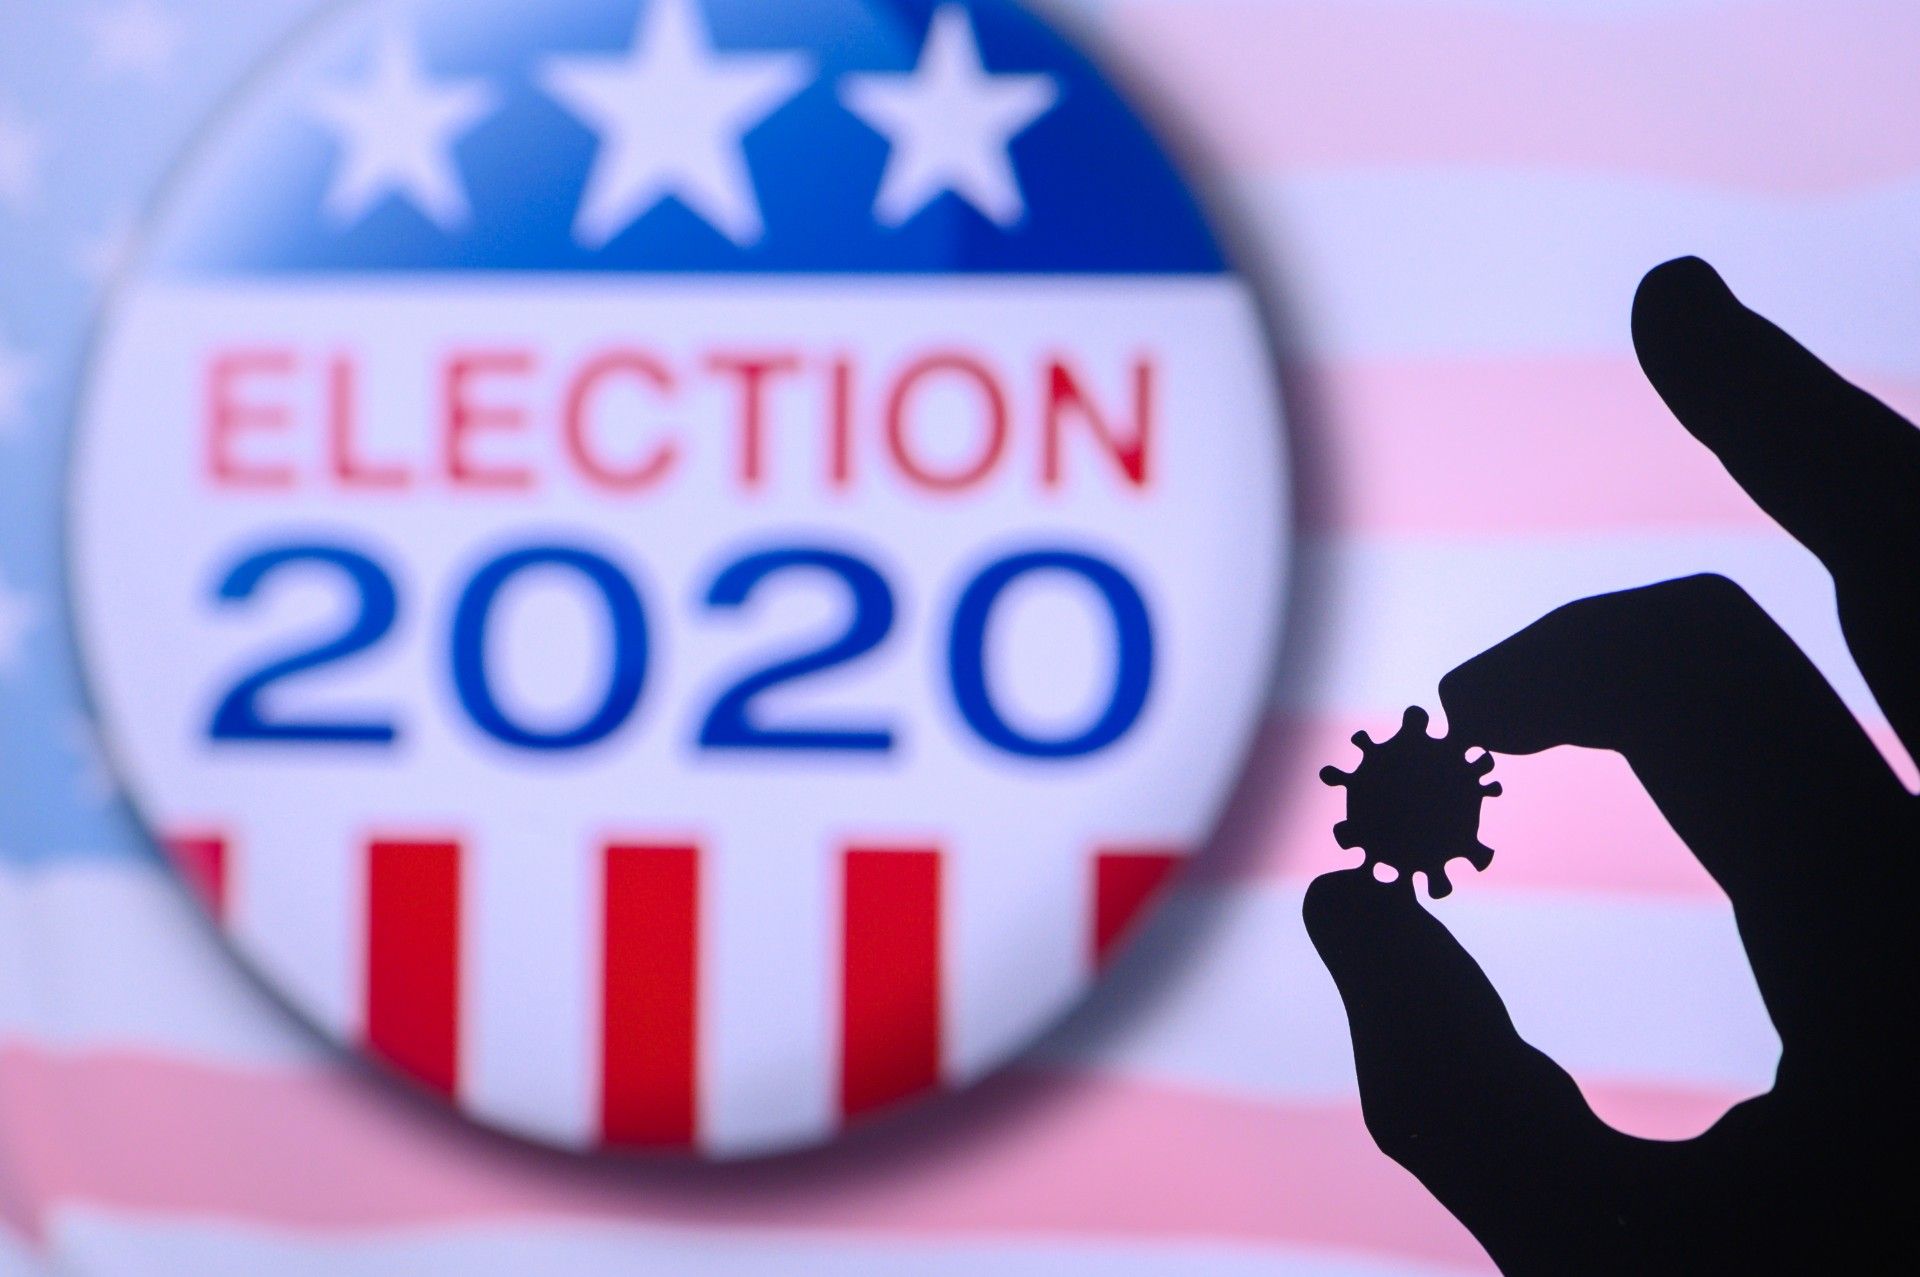 Silhouette of hand holding a coronavirus model between the thumb and forefinger, with red-white-and-blue "election 2020" graphic in the background- Nevada voters